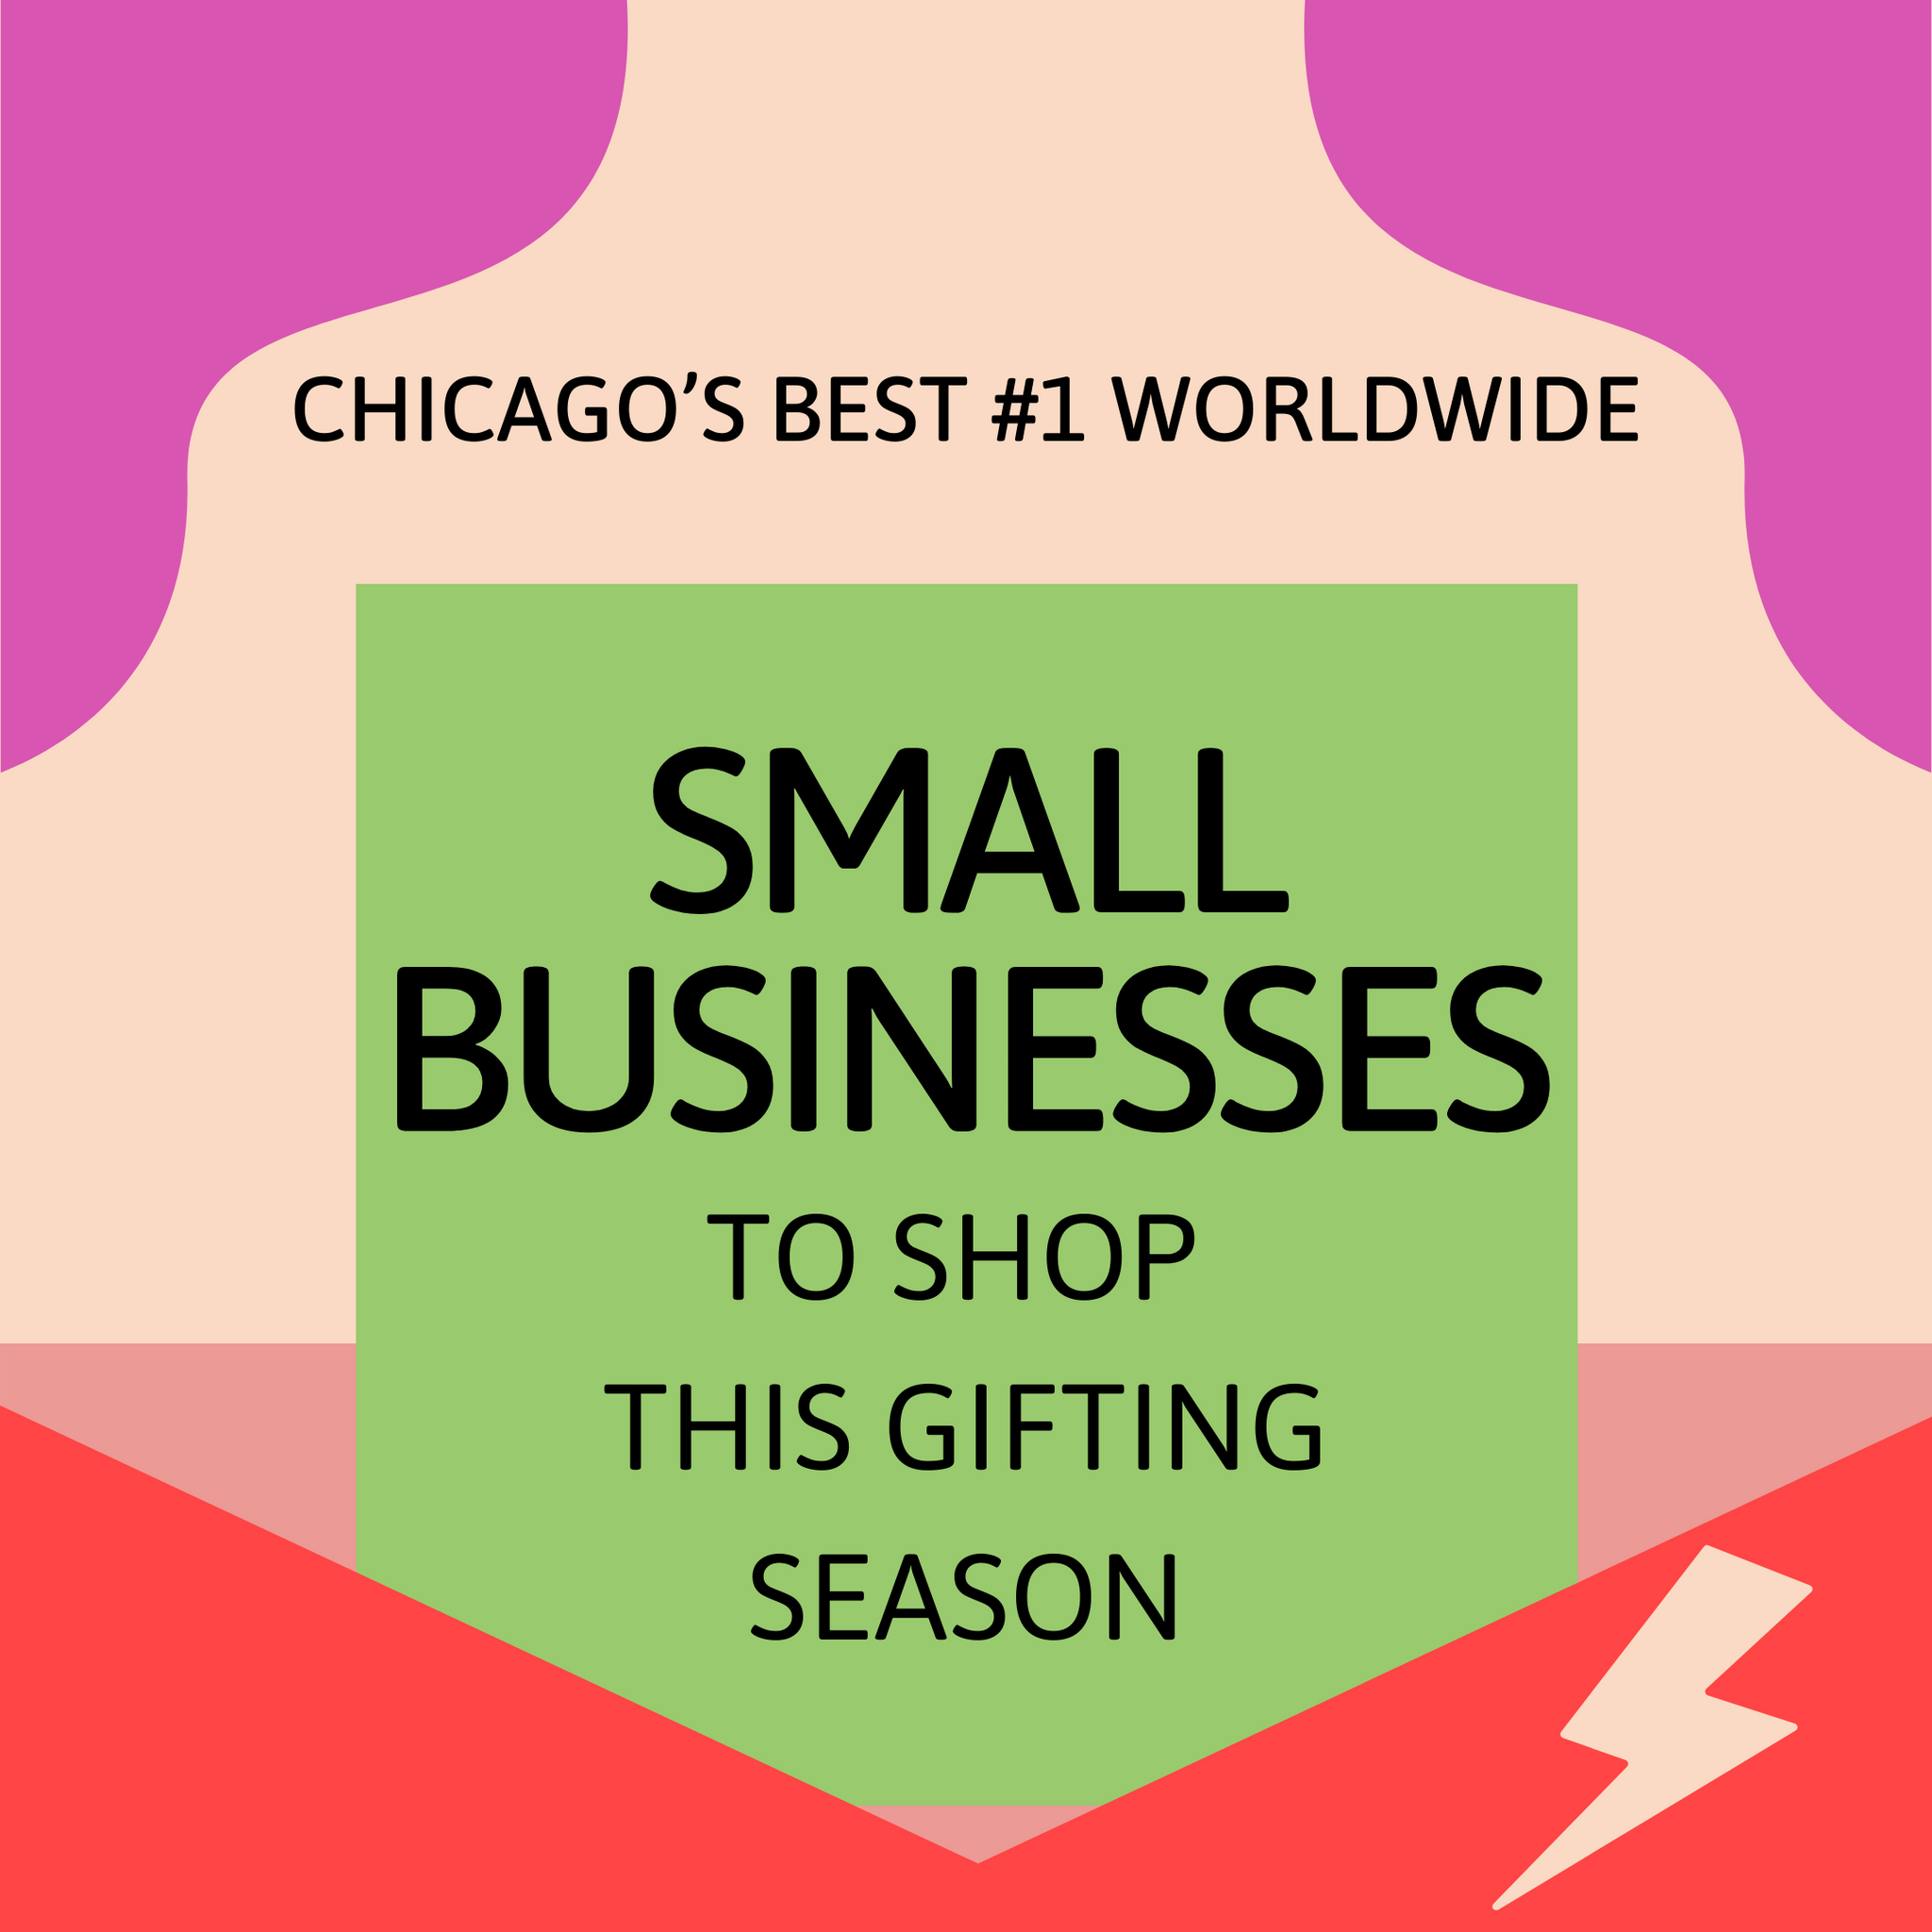 CHICAGOS BEST #1 WORLDWIDE SMALL BUSINESSES TO SHOP THIS SMALL BUSINESS SATURDAY